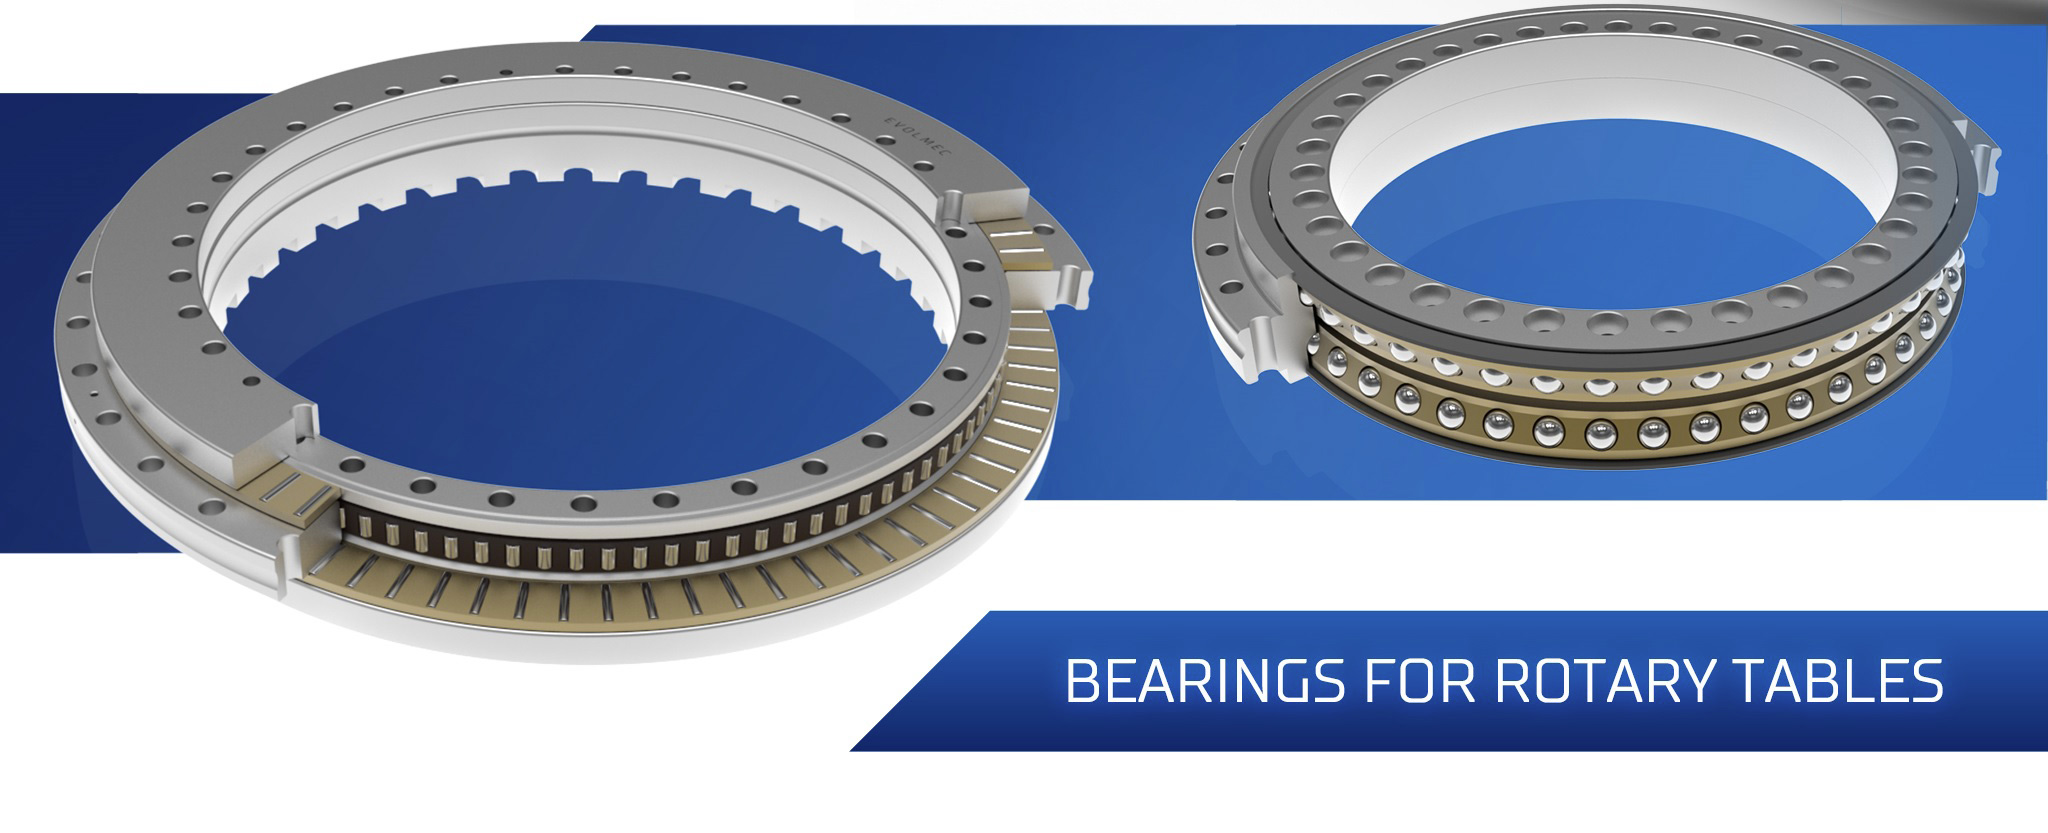 Bearing for rotary tables